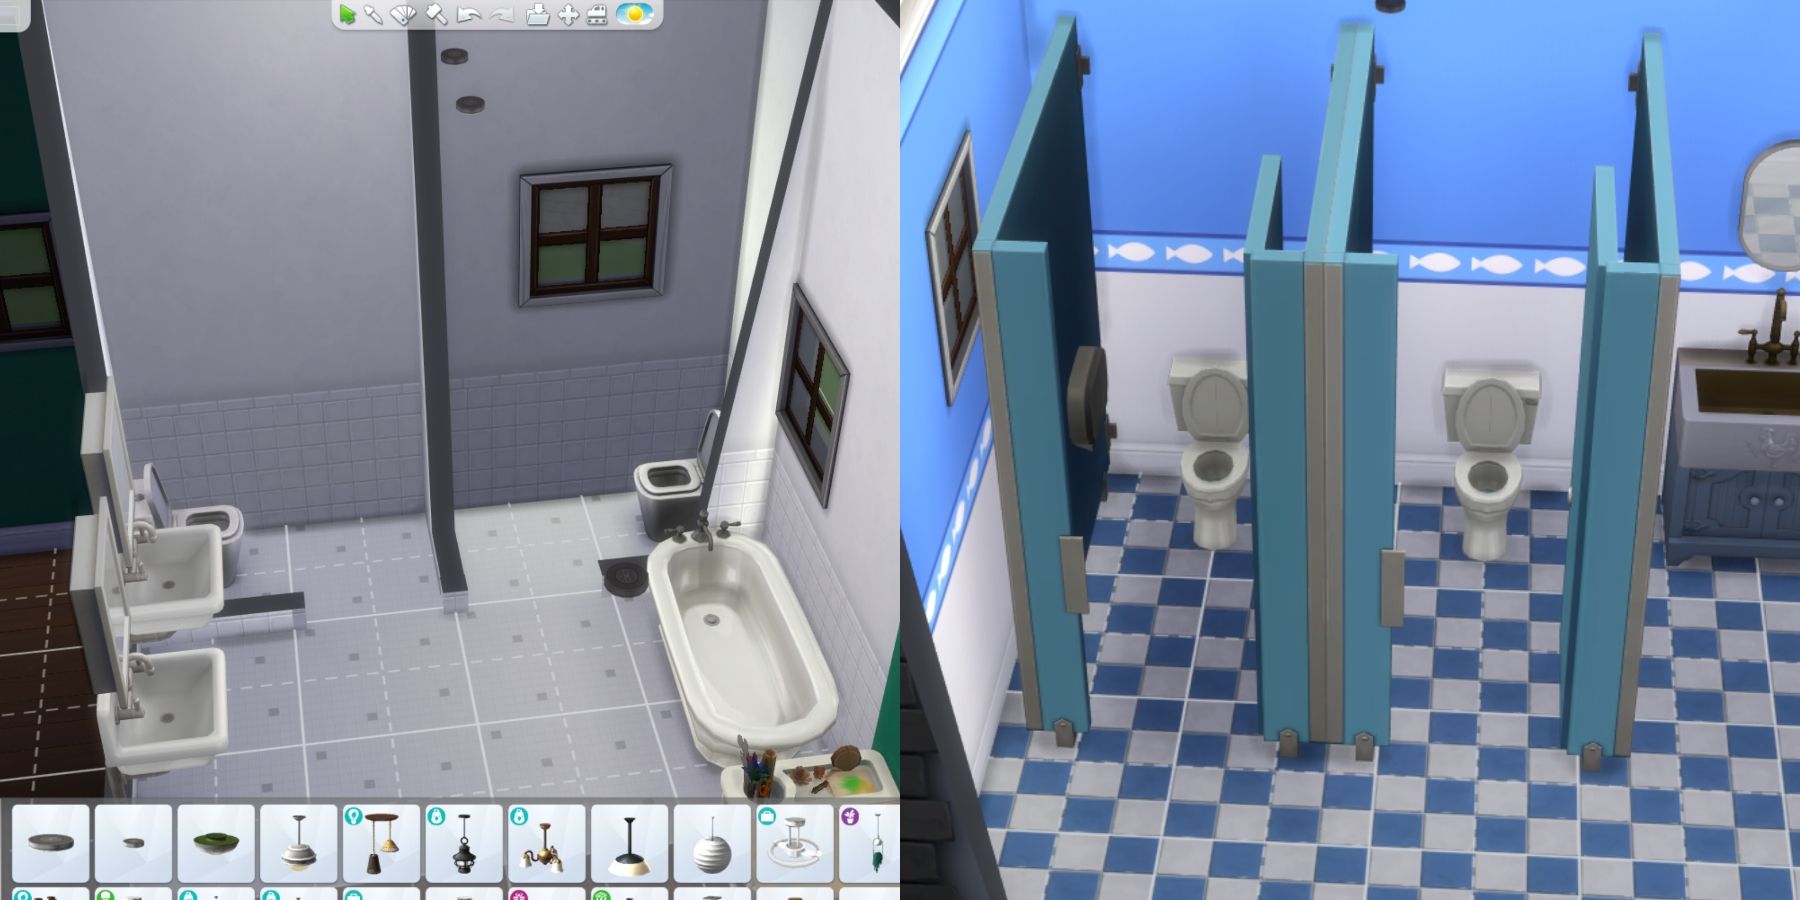 stall bathroom in the sims 4